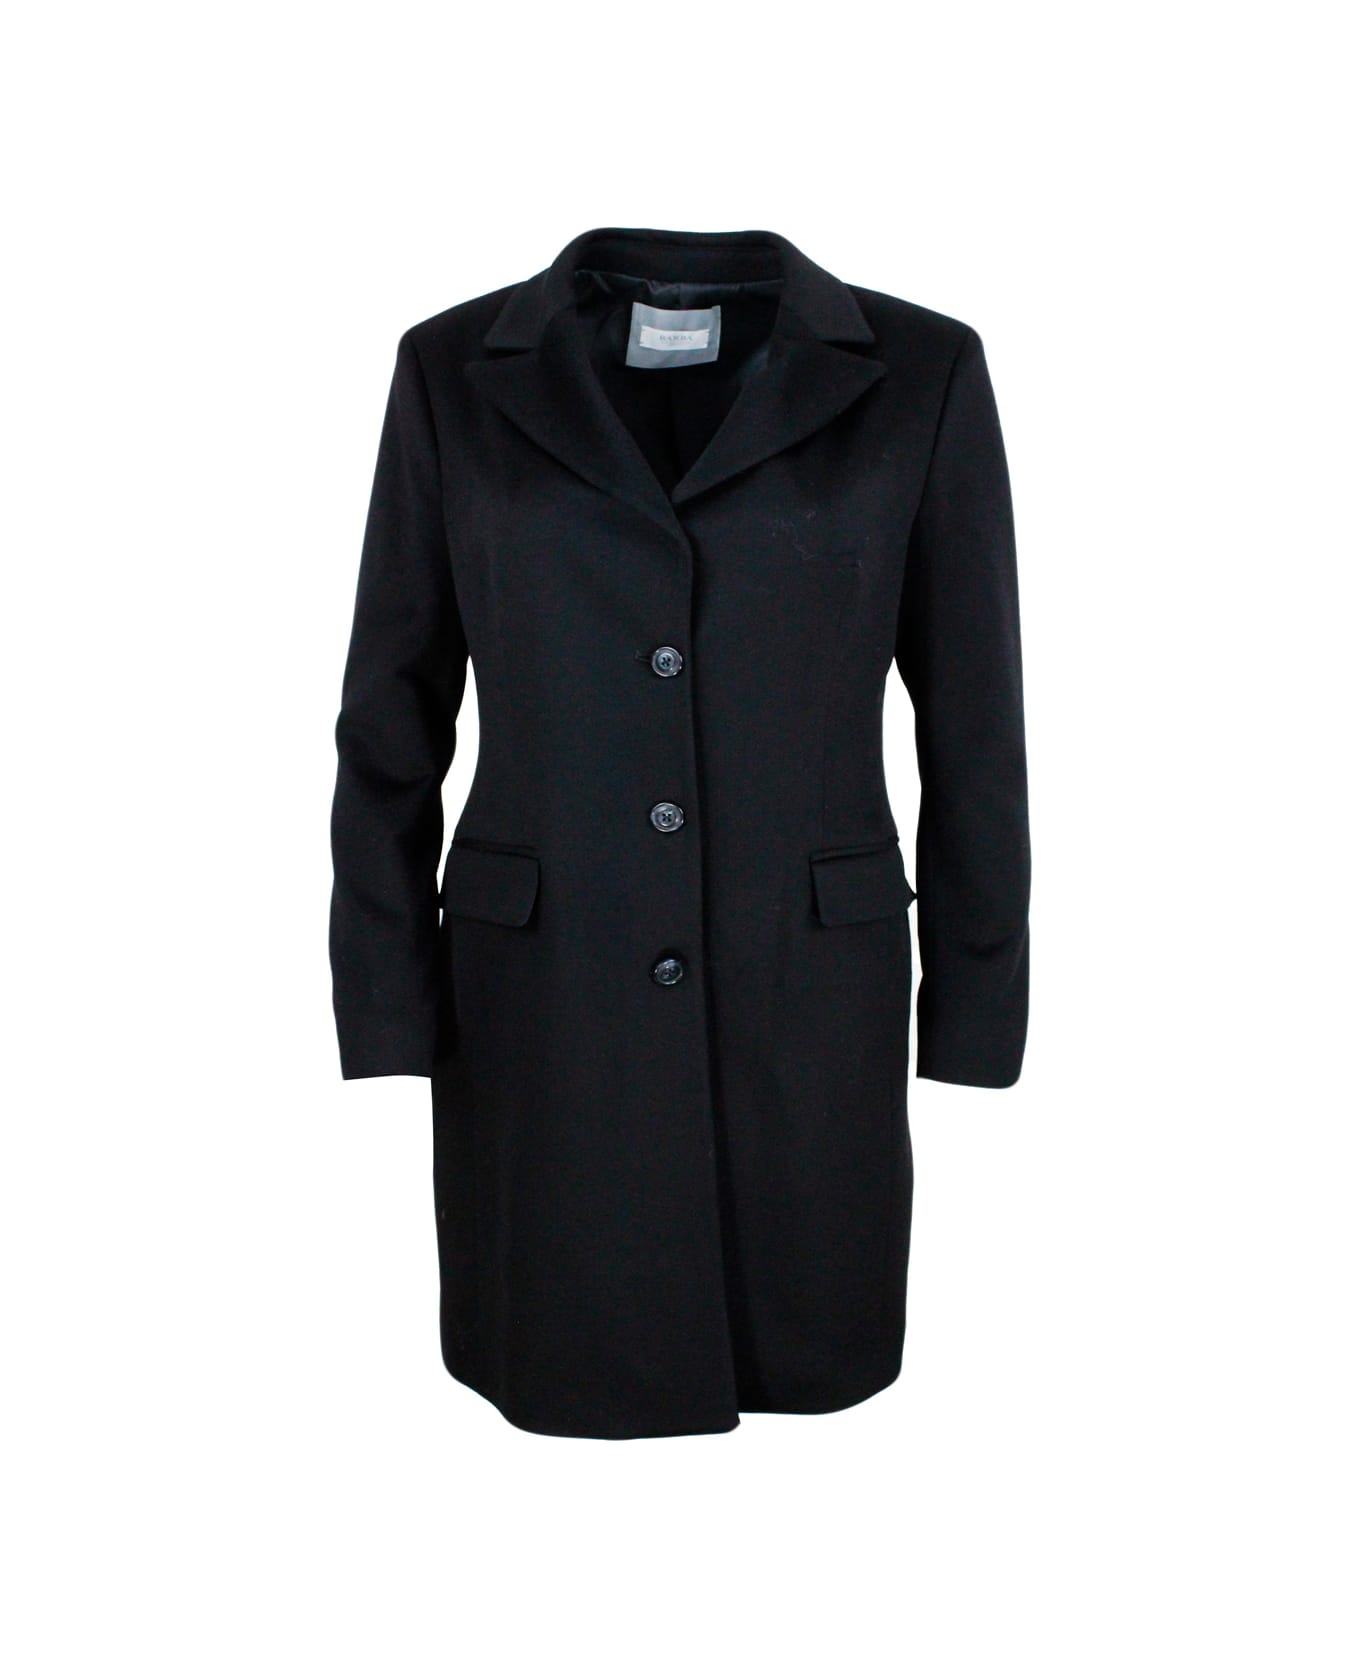 Barba Napoli Single-breasted Coat Made Of Soft And Precious Cashmere With Flap Pockets And Button Closure. Matching Inner Lining. Side By Side Slim Line - Black